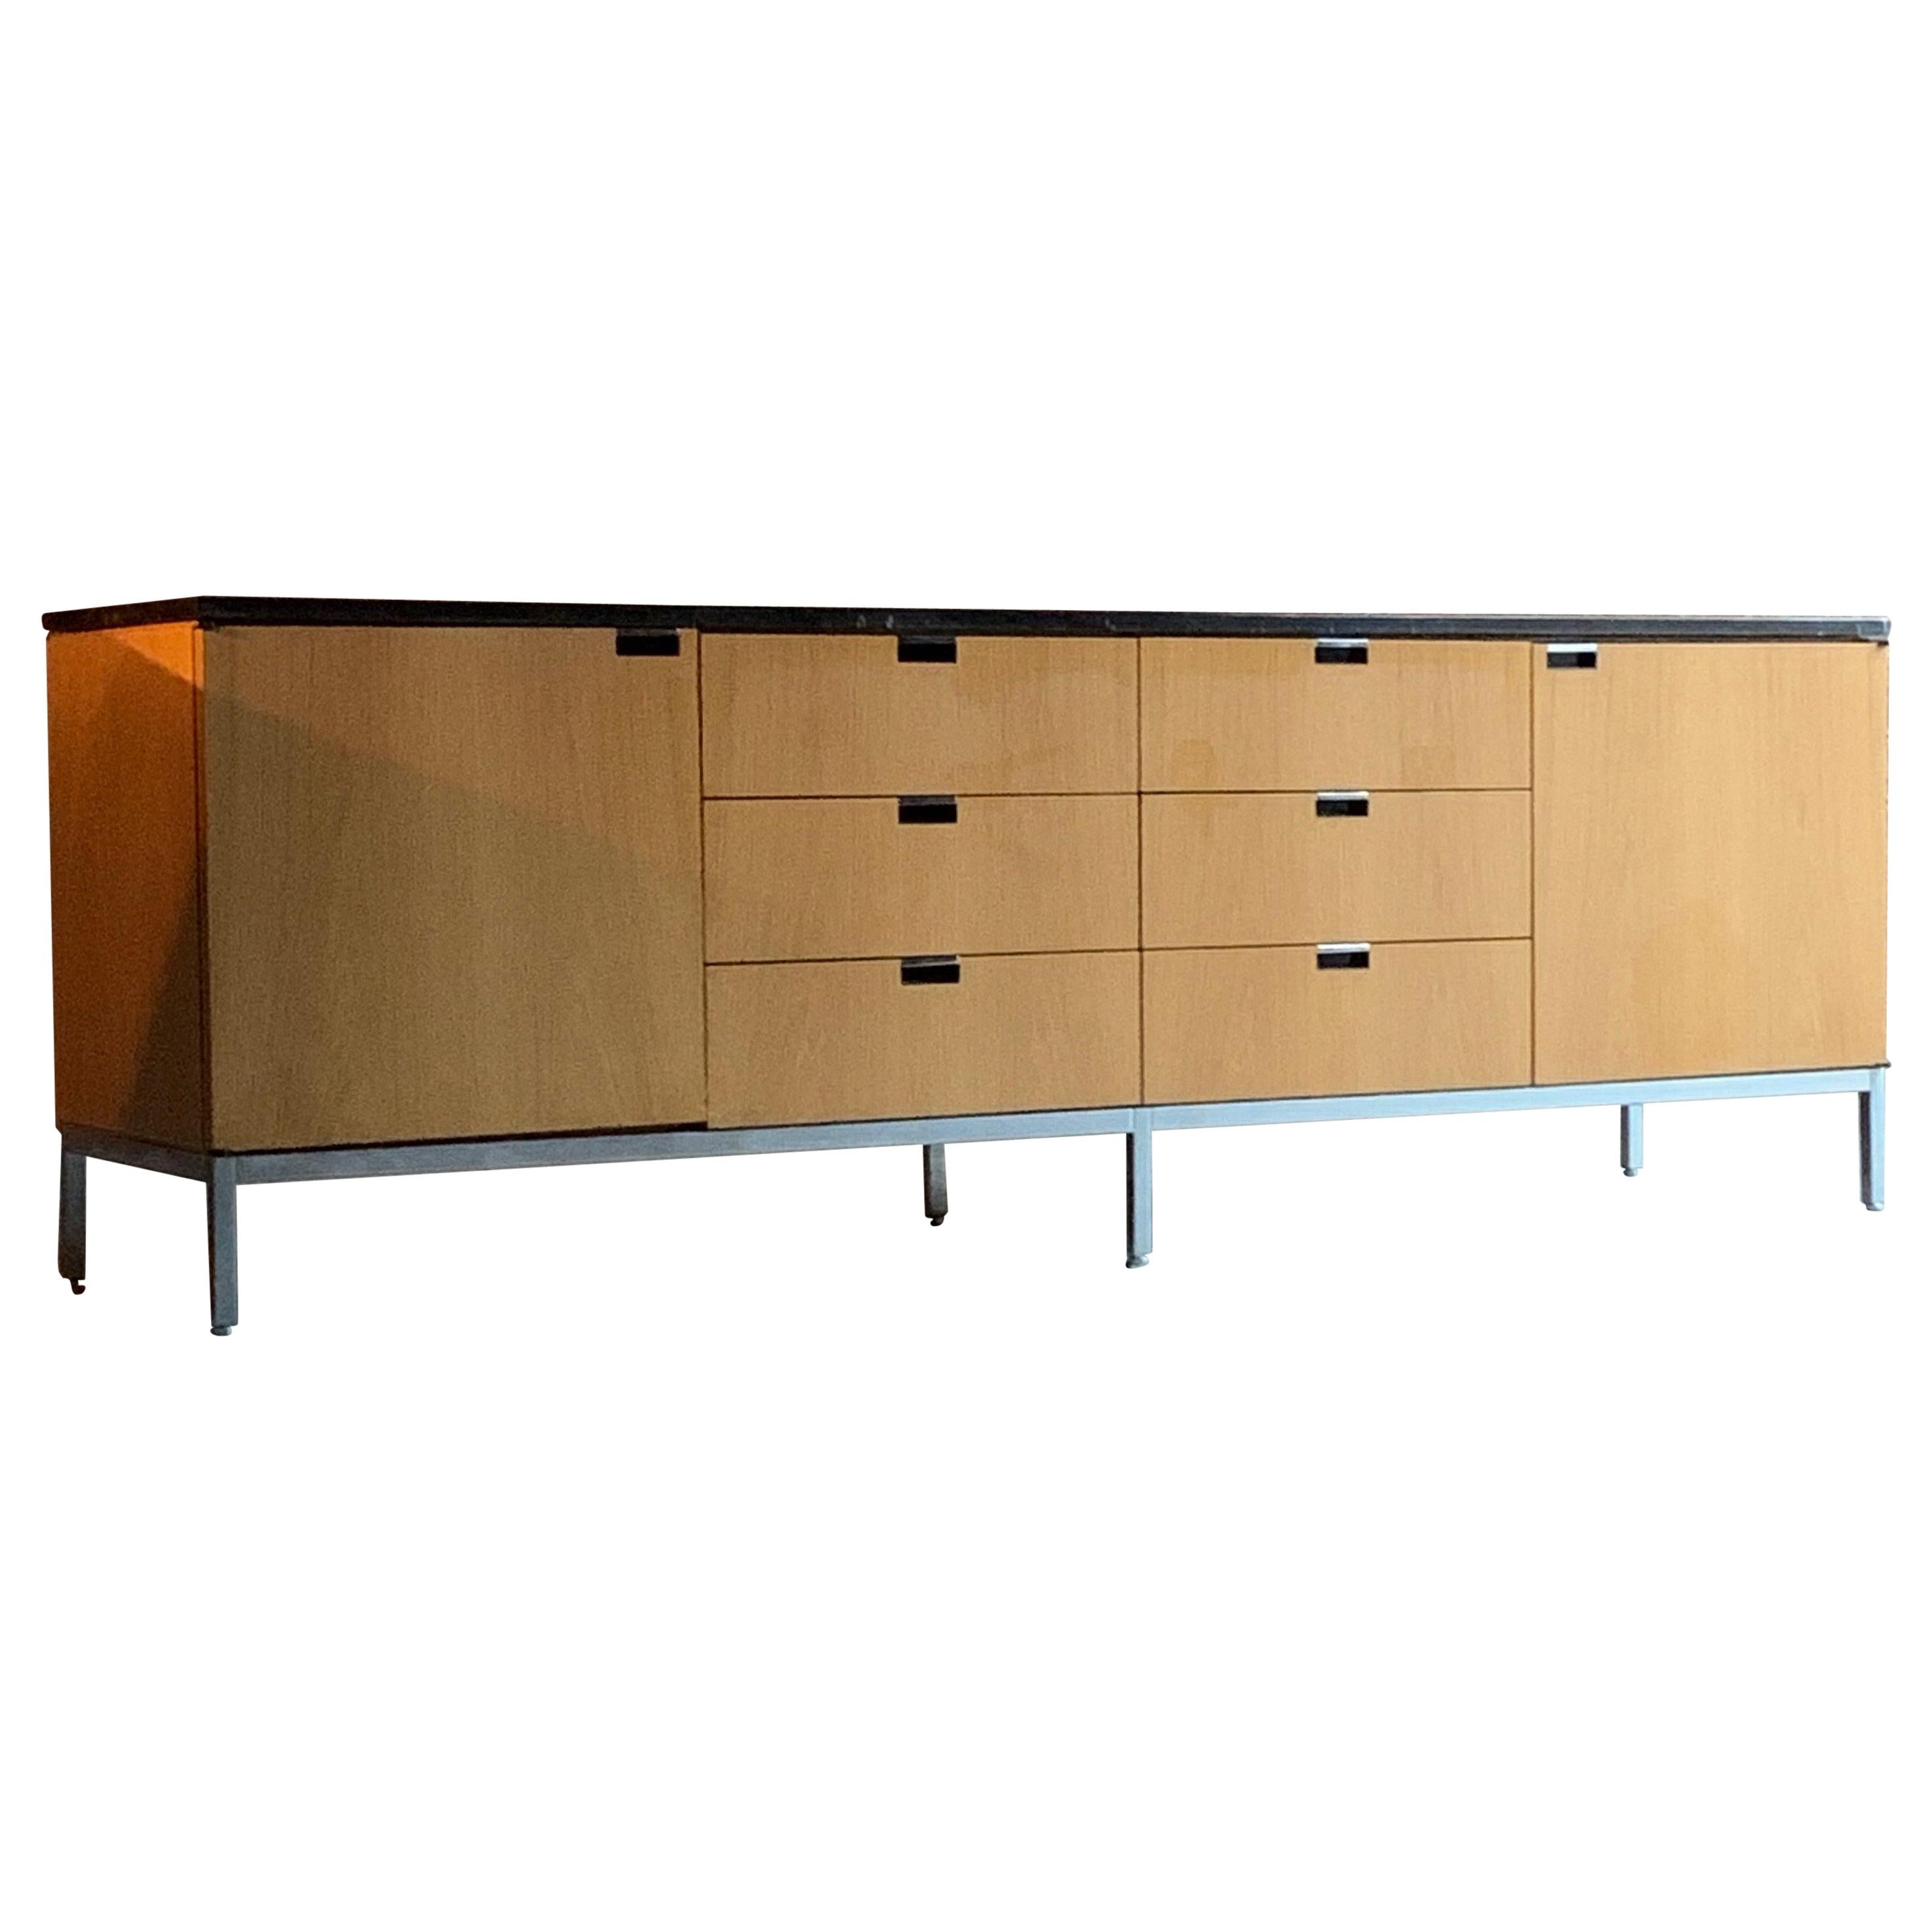 Florence Knoll Credenza Sideboard Oak and Nero Marquina Marble Original, 1970s